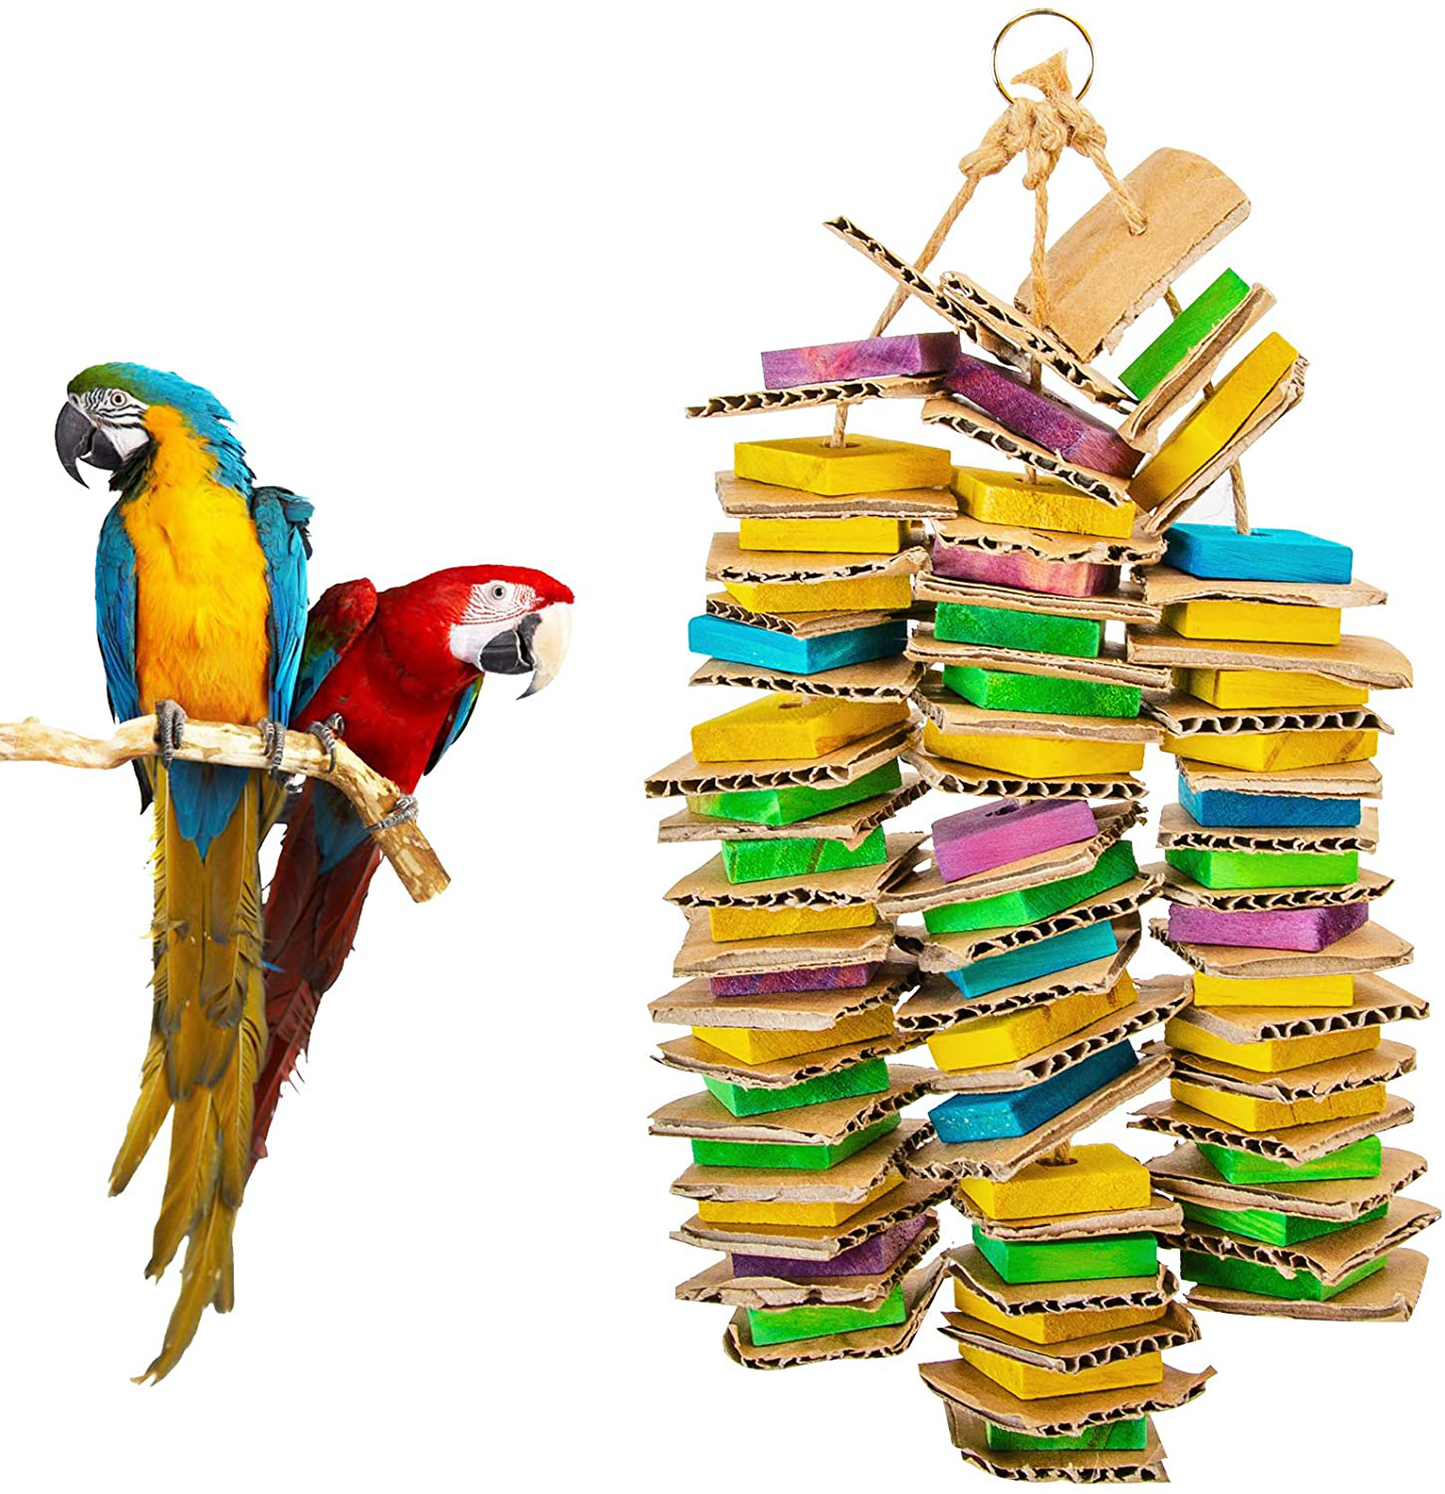 MYFAMIREA Parrot Toys for Medium Birds, Parrot Chewing Toy Bird Cage Chewing Toy for African Greys, Cockatoos, Macaws, Small Medium and Large Birds